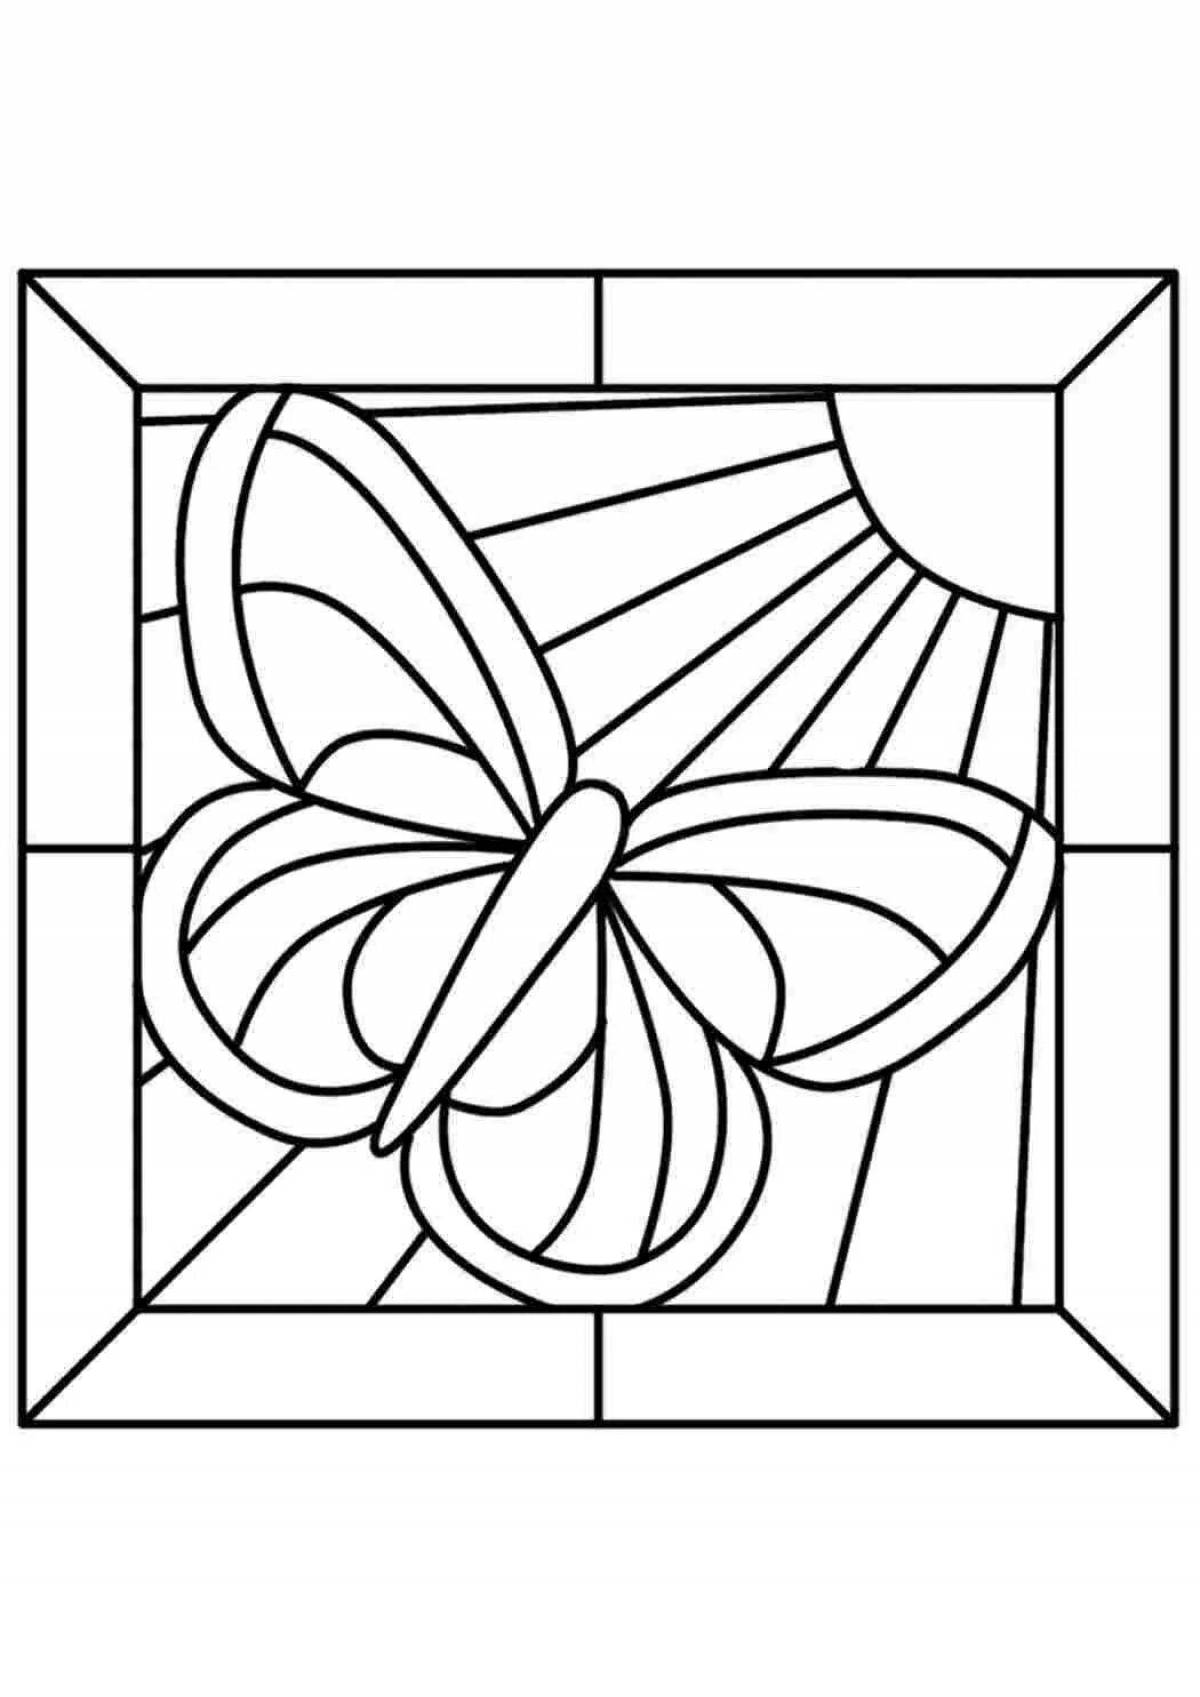 Adorable stained glass coloring book for kids